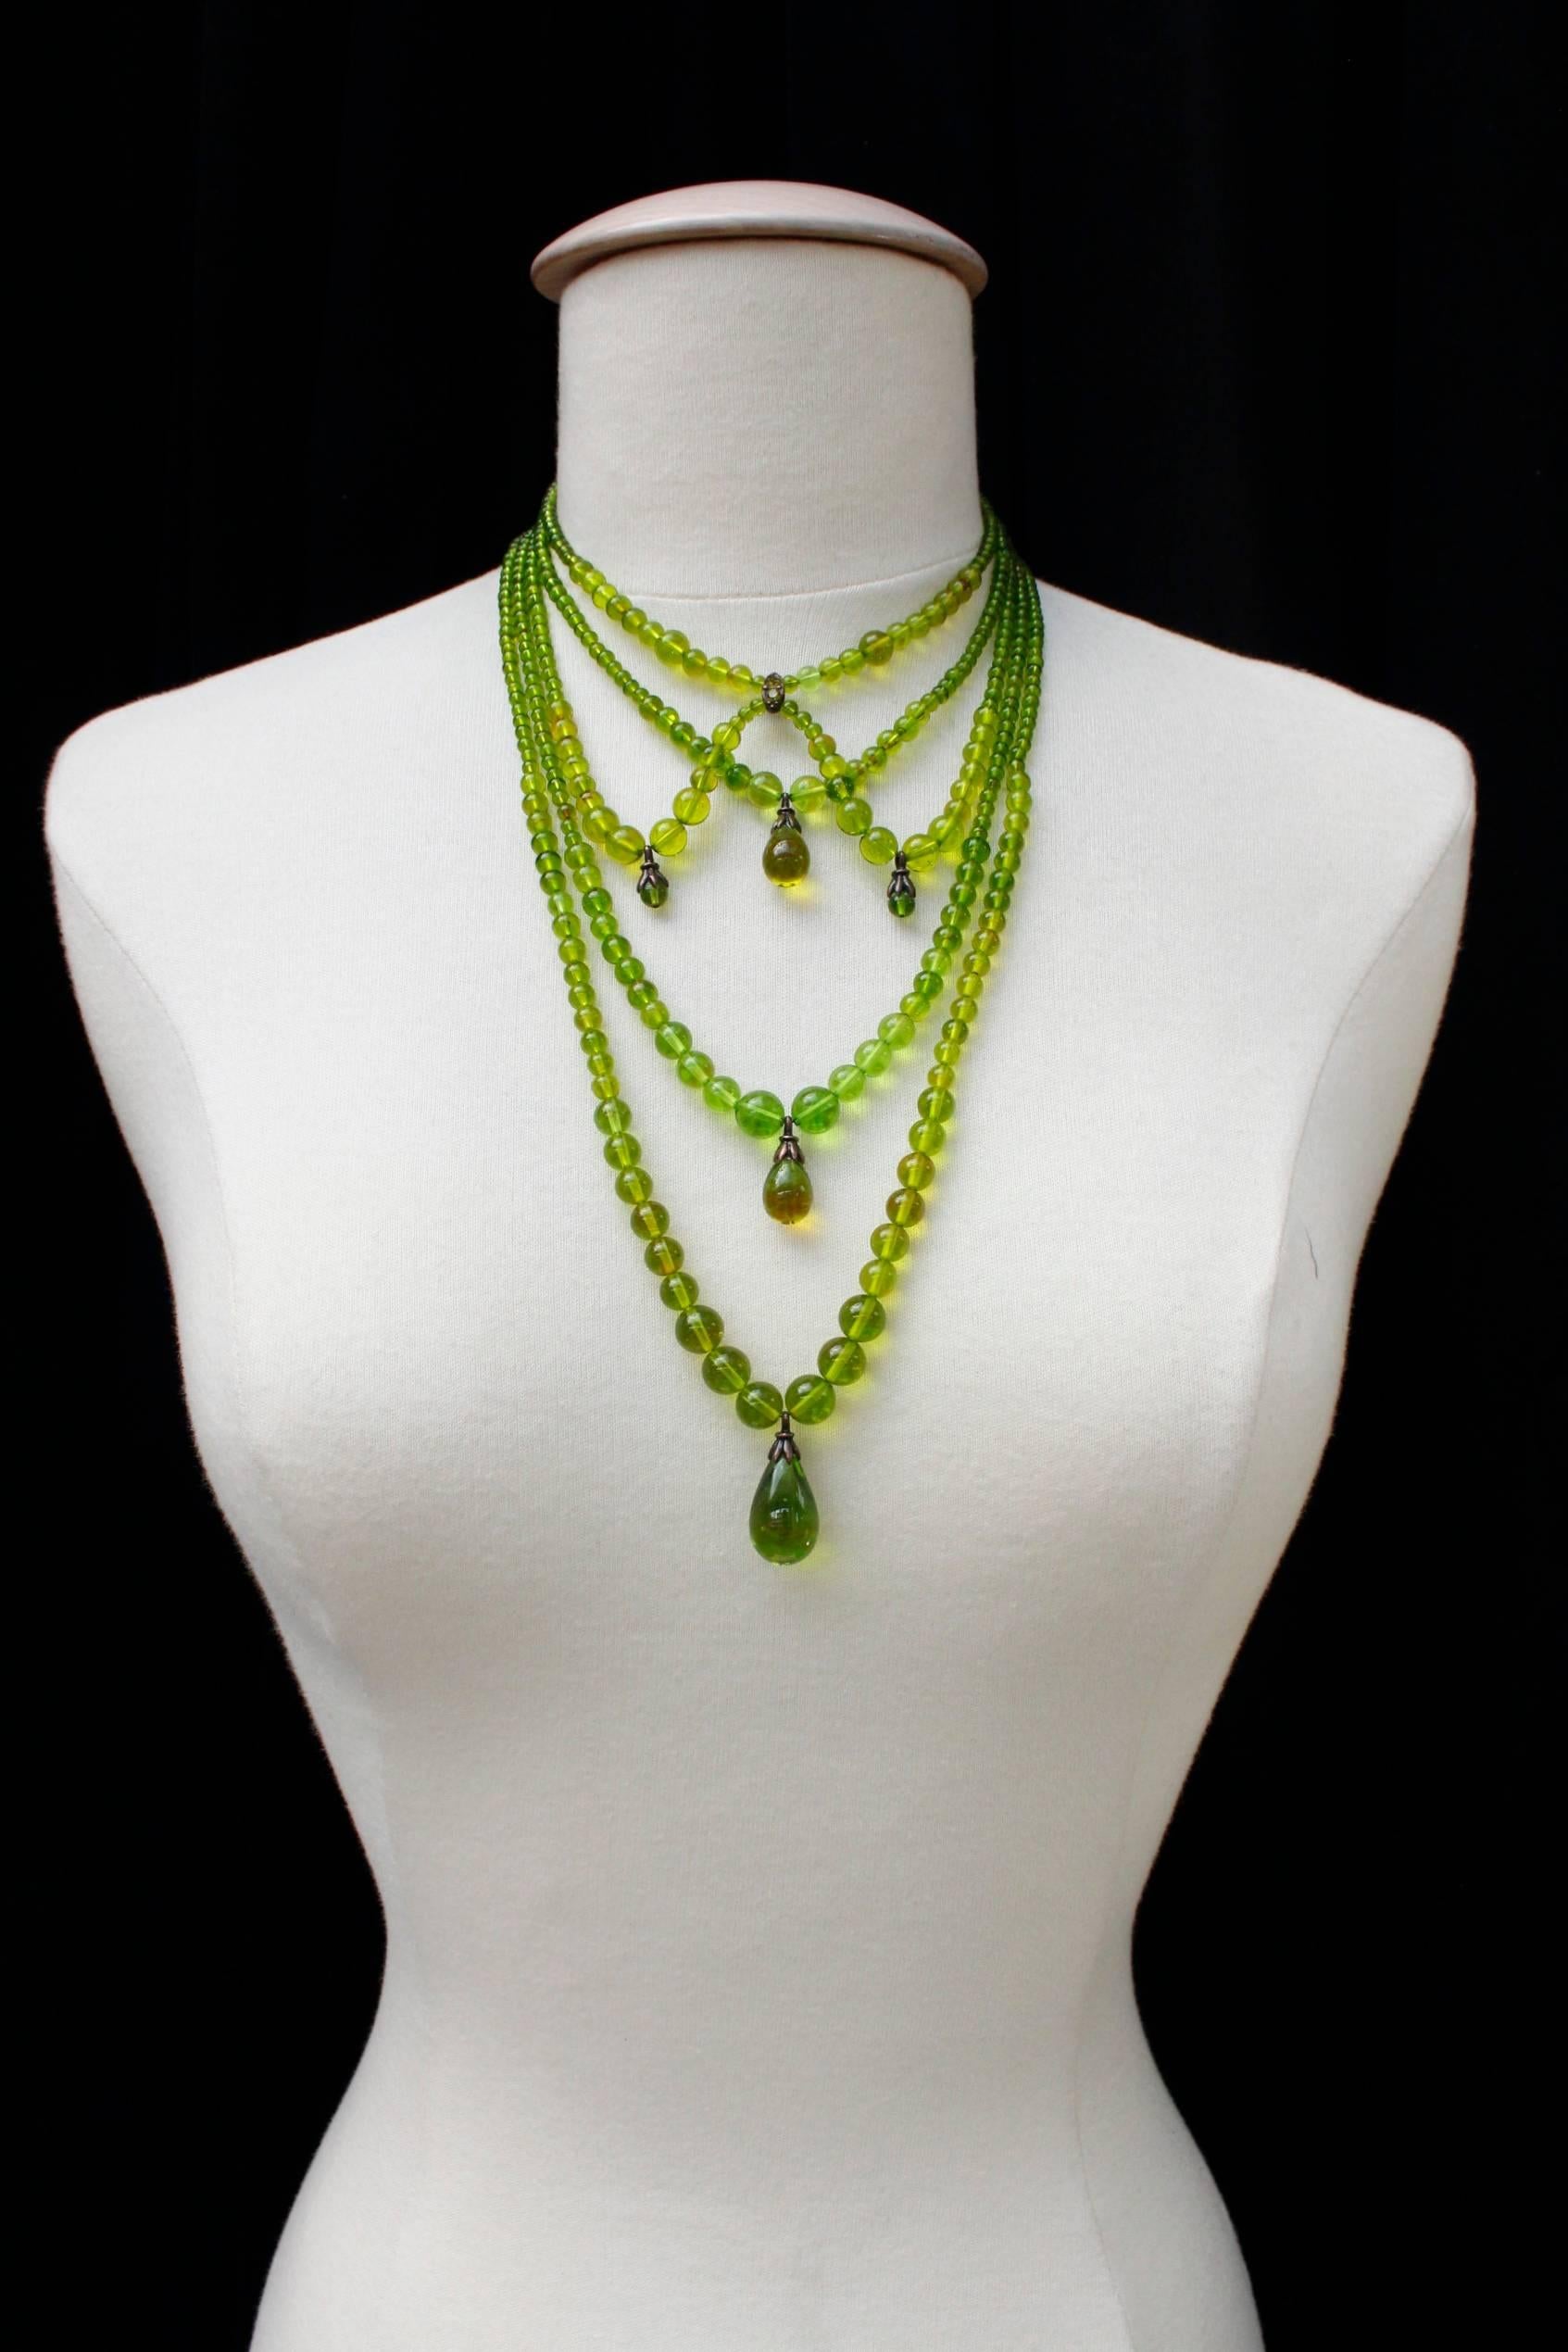 CHRISTIAN DIOR BOUTIQUE (Made in France) Long statement necklace composed of five rows of green glass beads mounted on wire. 

Each row of beads includes a drop bead surmounted by a blackened silver metallic post. 

The hook clasp is in blackened